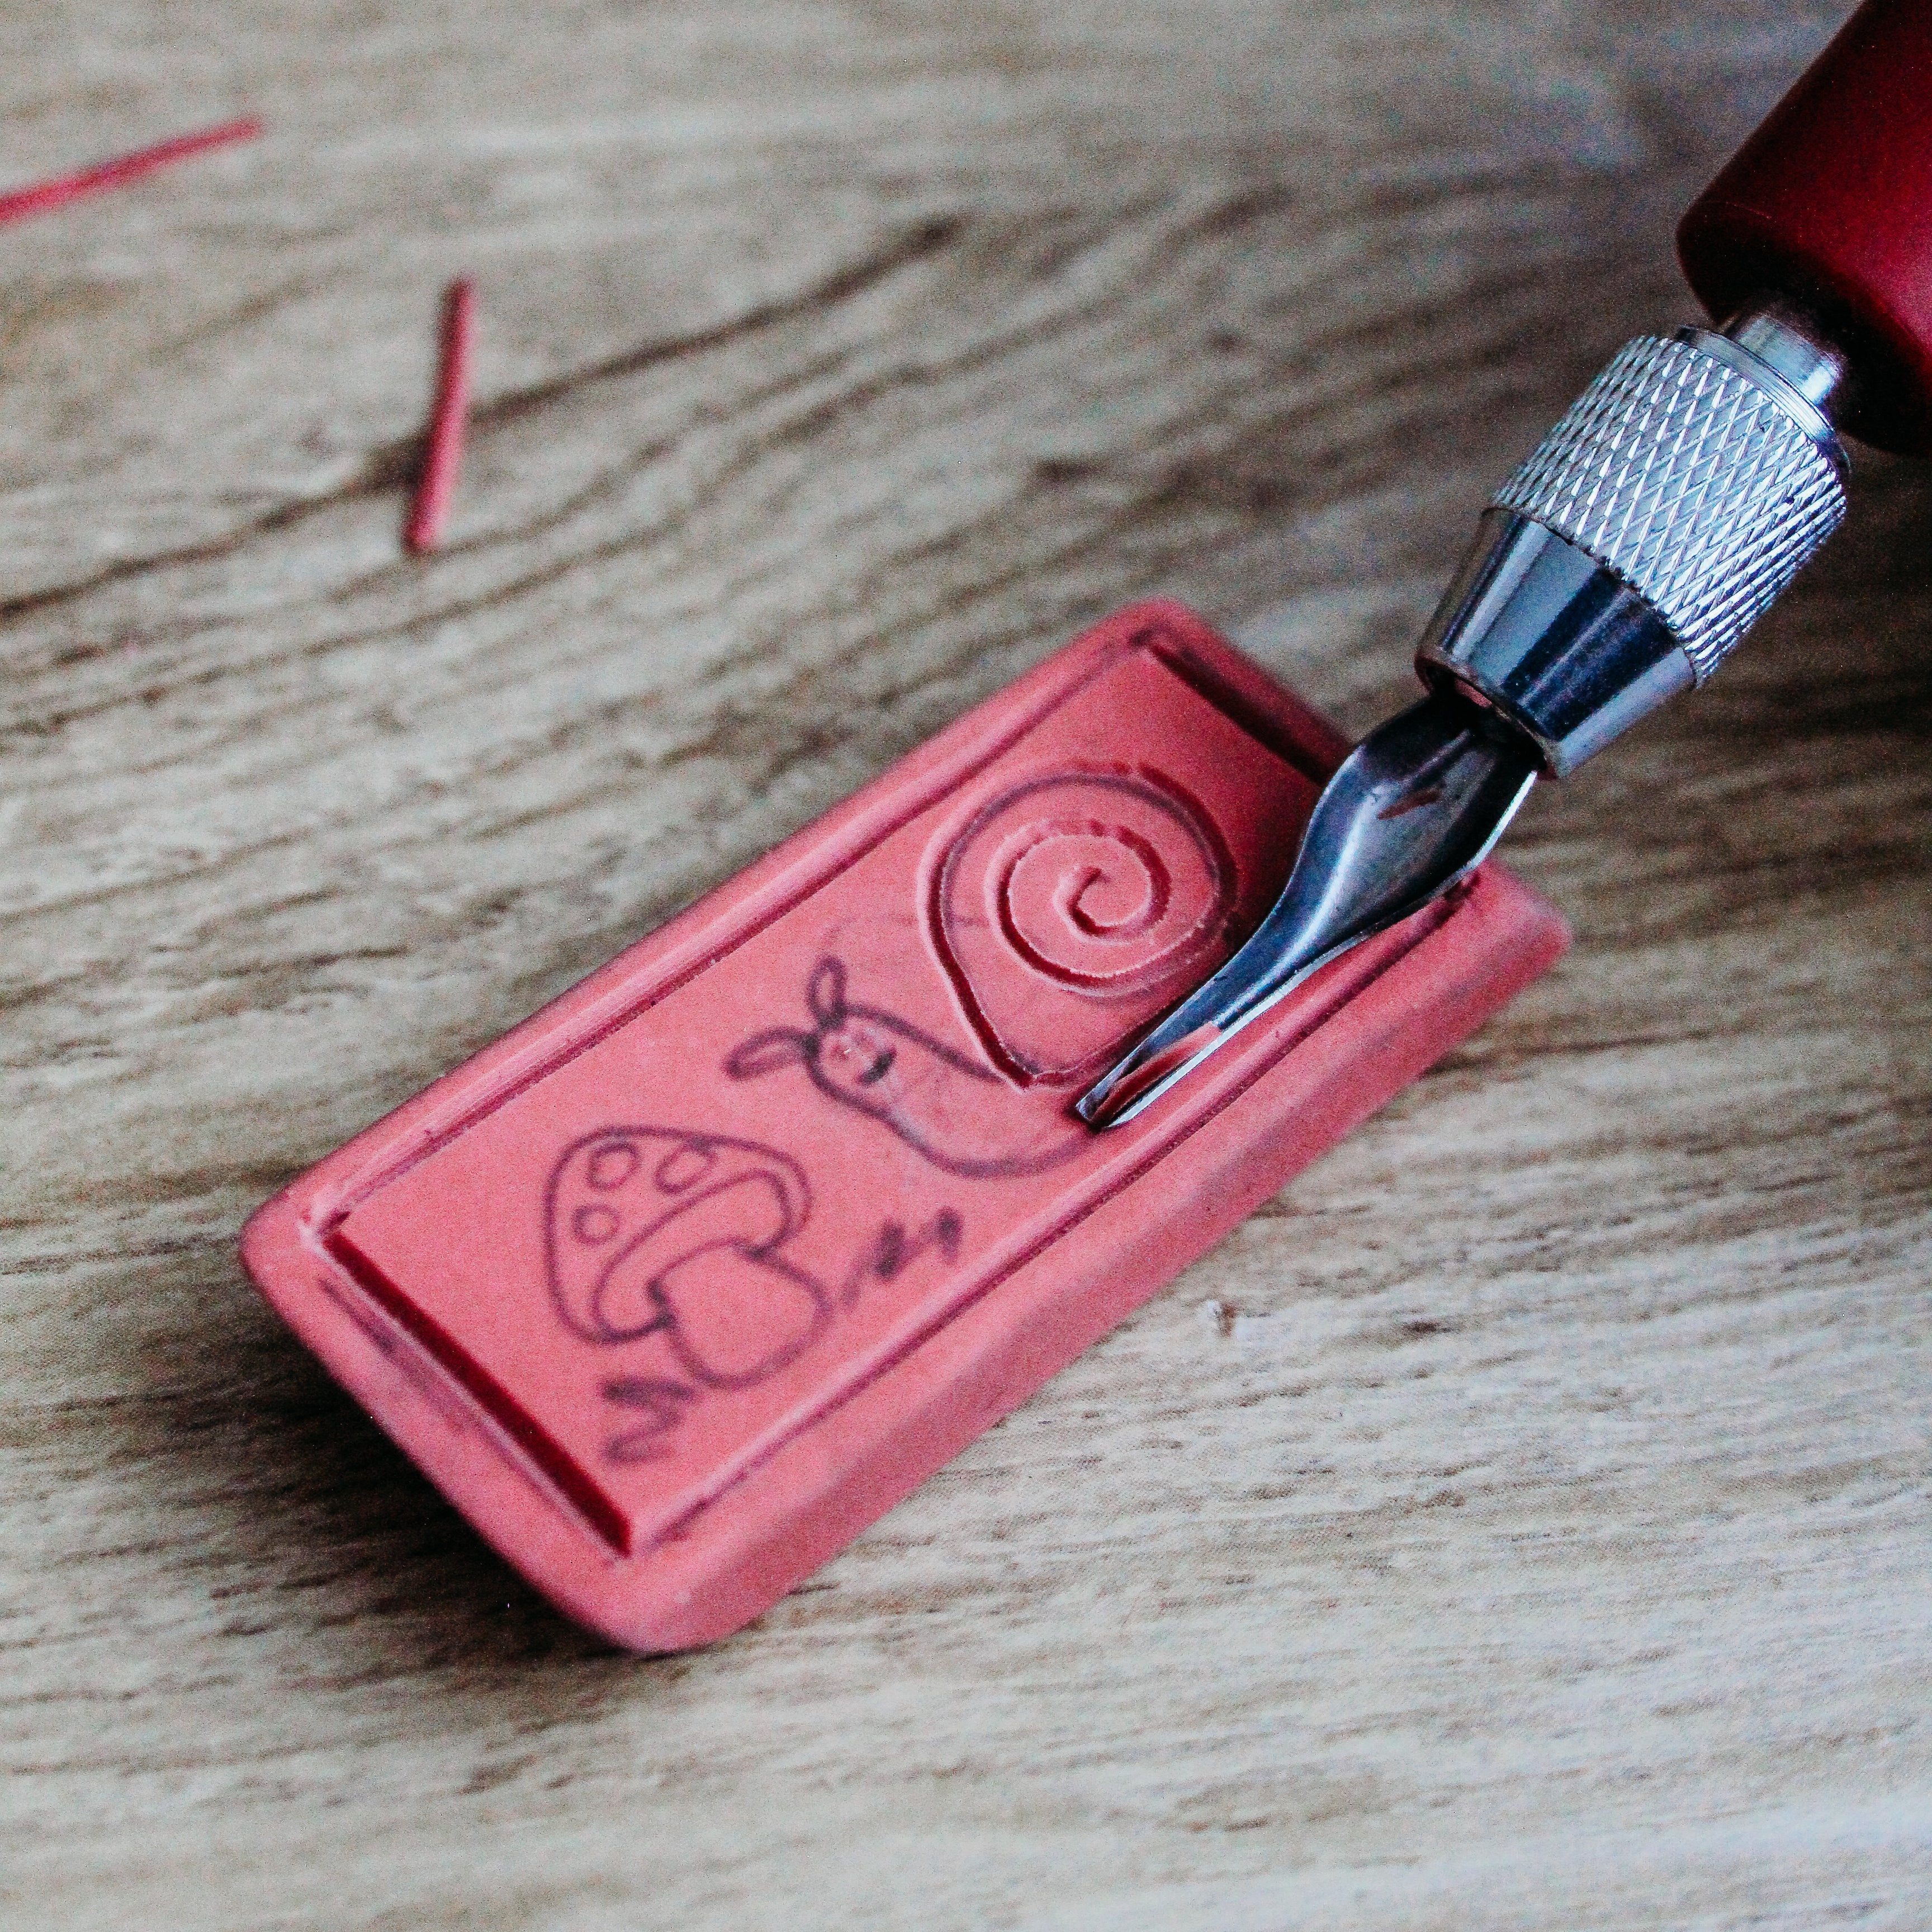 An eraser is being carved with a linoleum cutting tool.